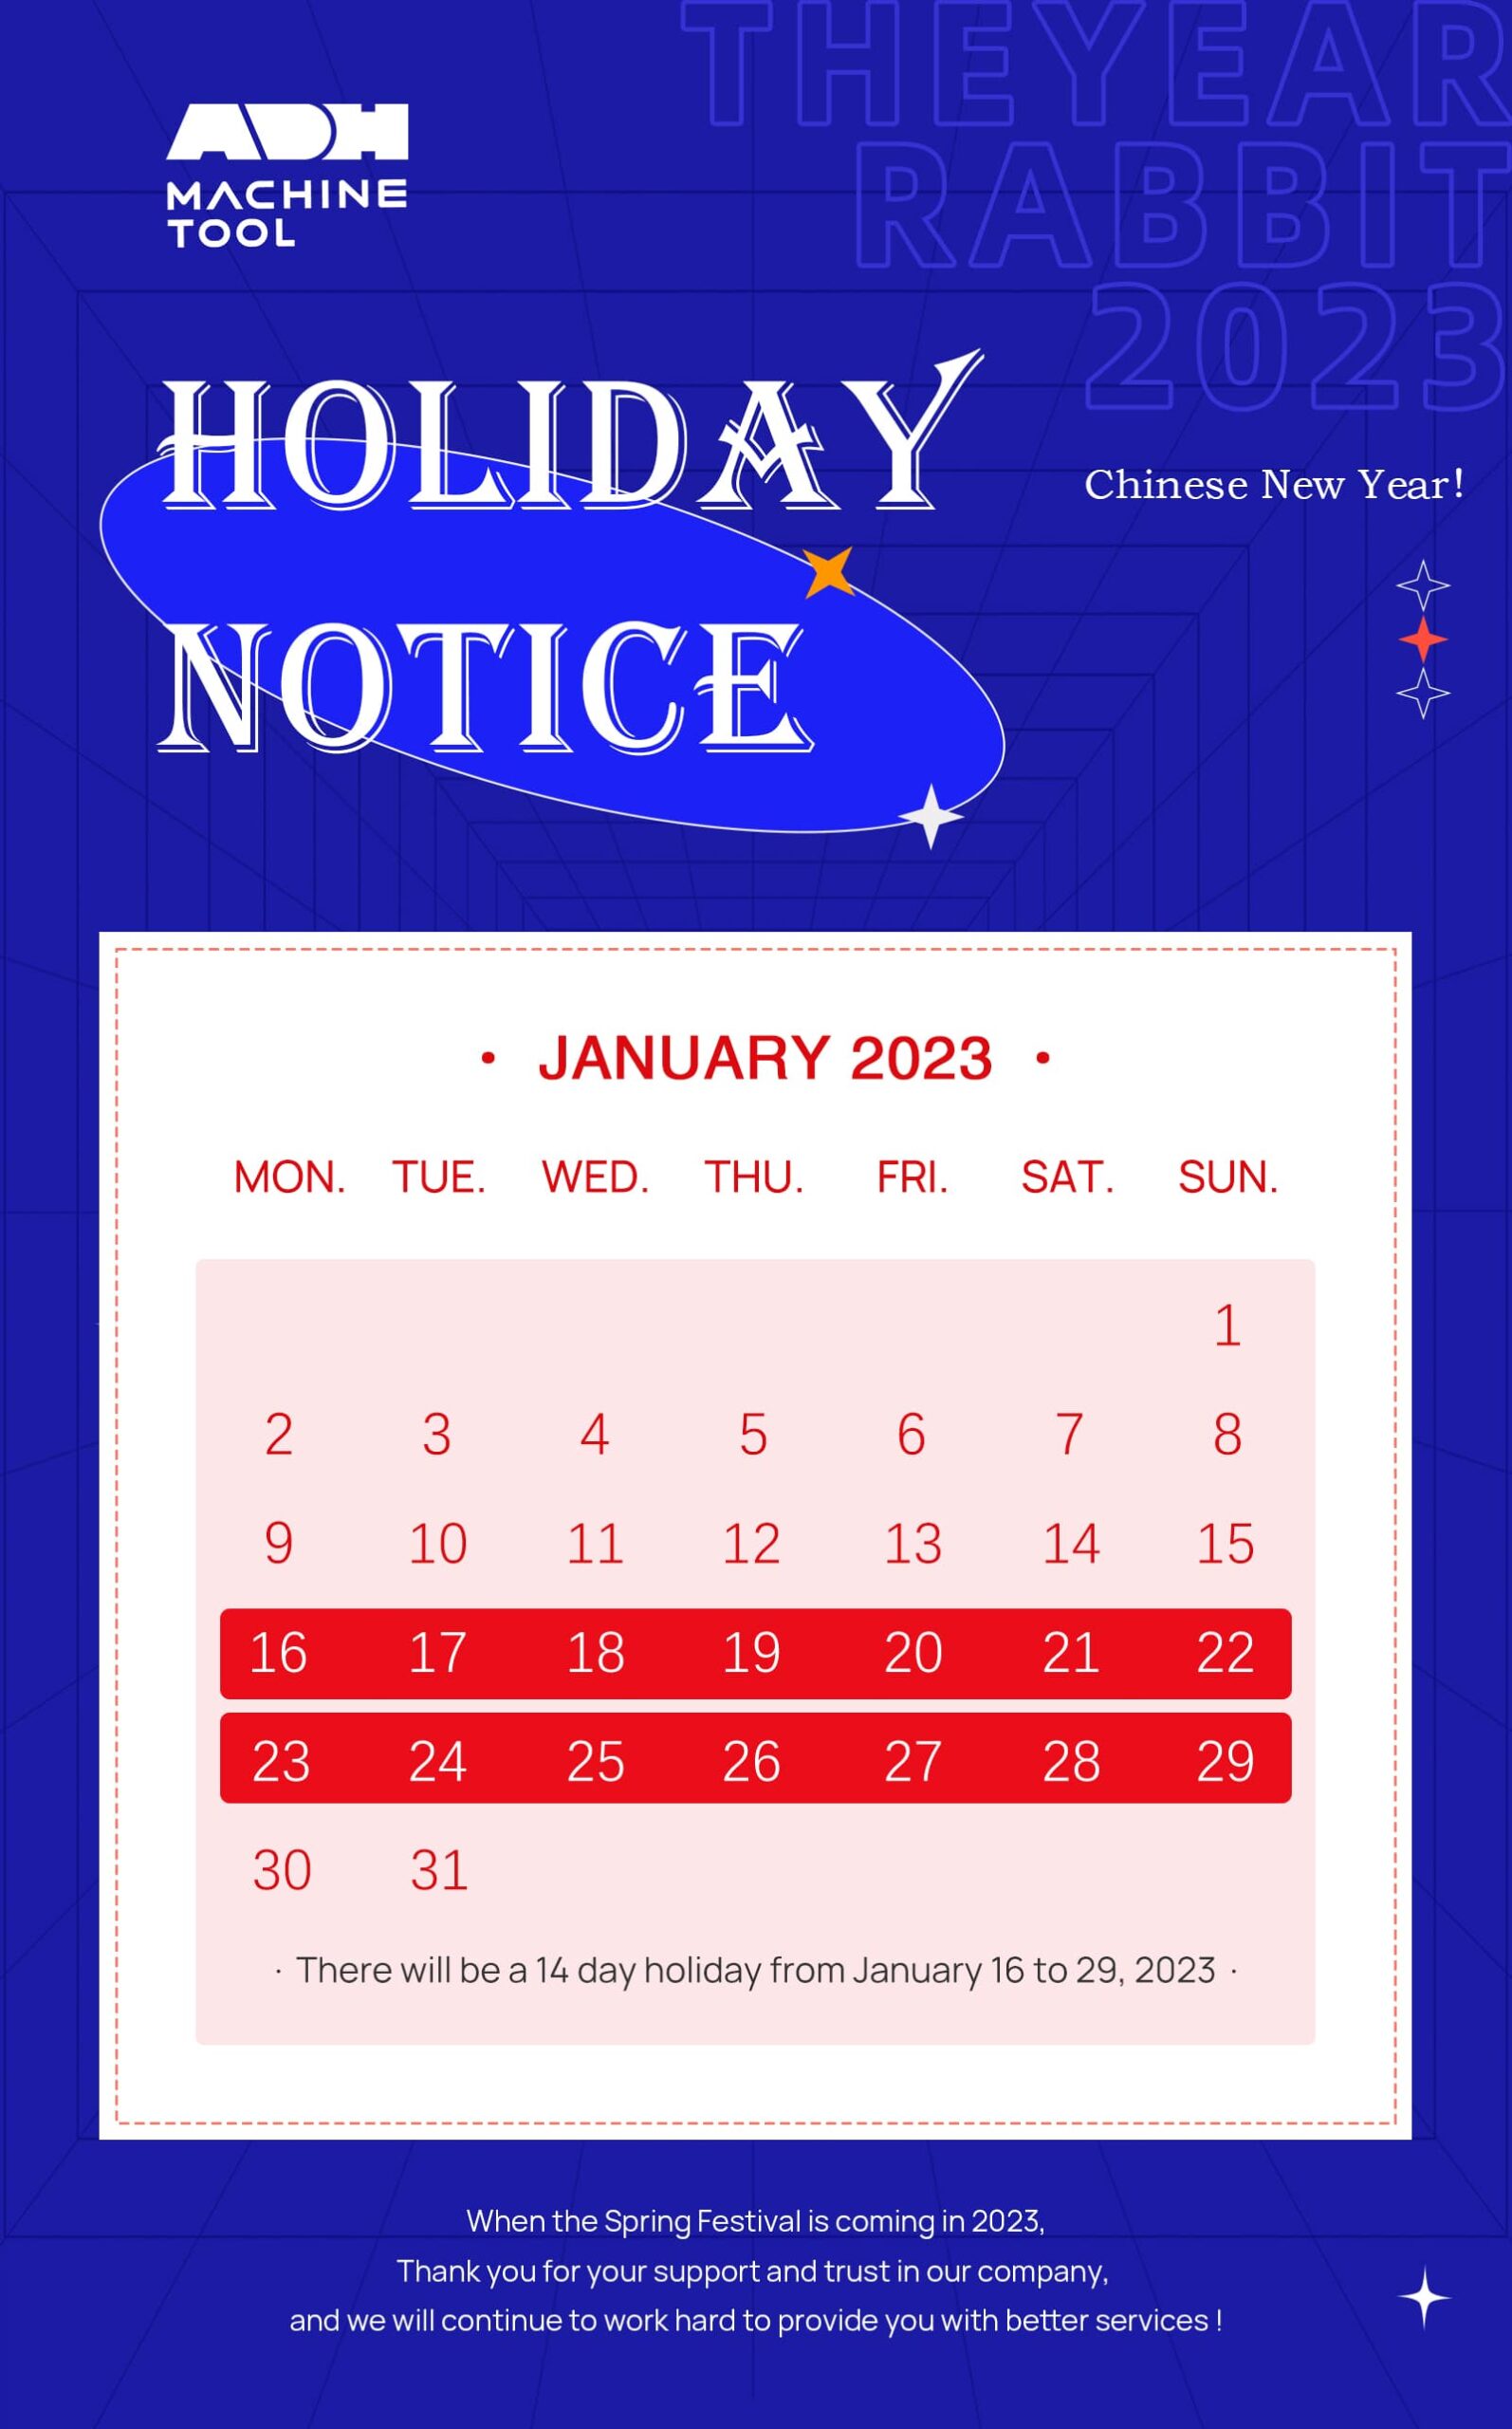 Chinese New Year: Our Company to Close for 14 Days - Resume Work Jan. 30!